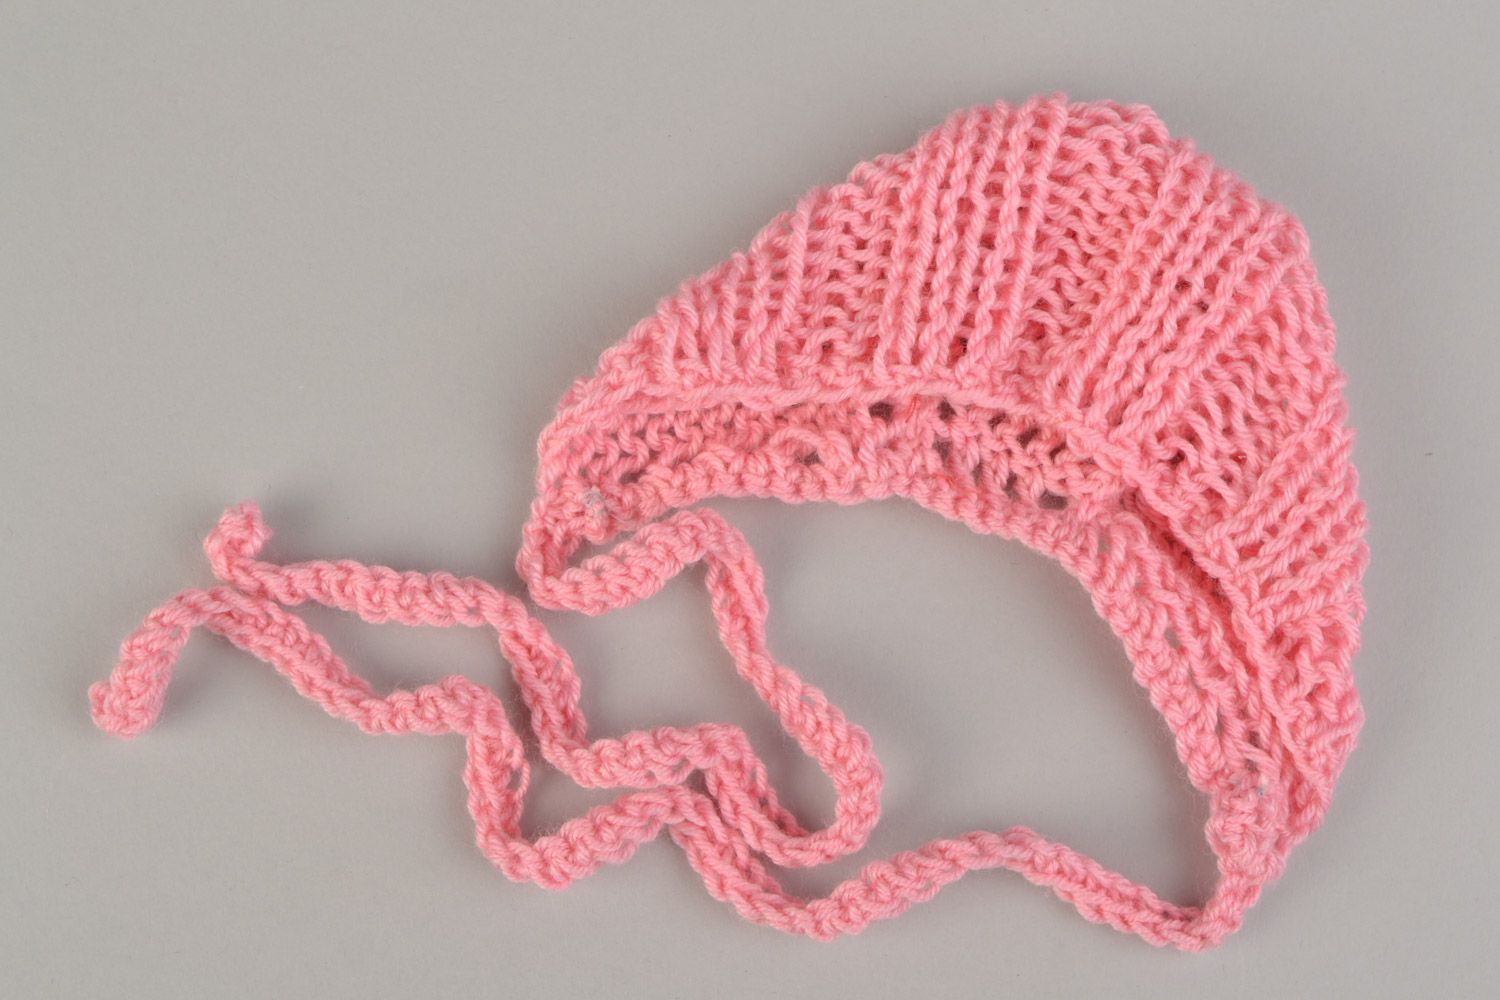 Handmade crocheted baby pink hat made of acrylic yarns for girls clothes for children photo 1